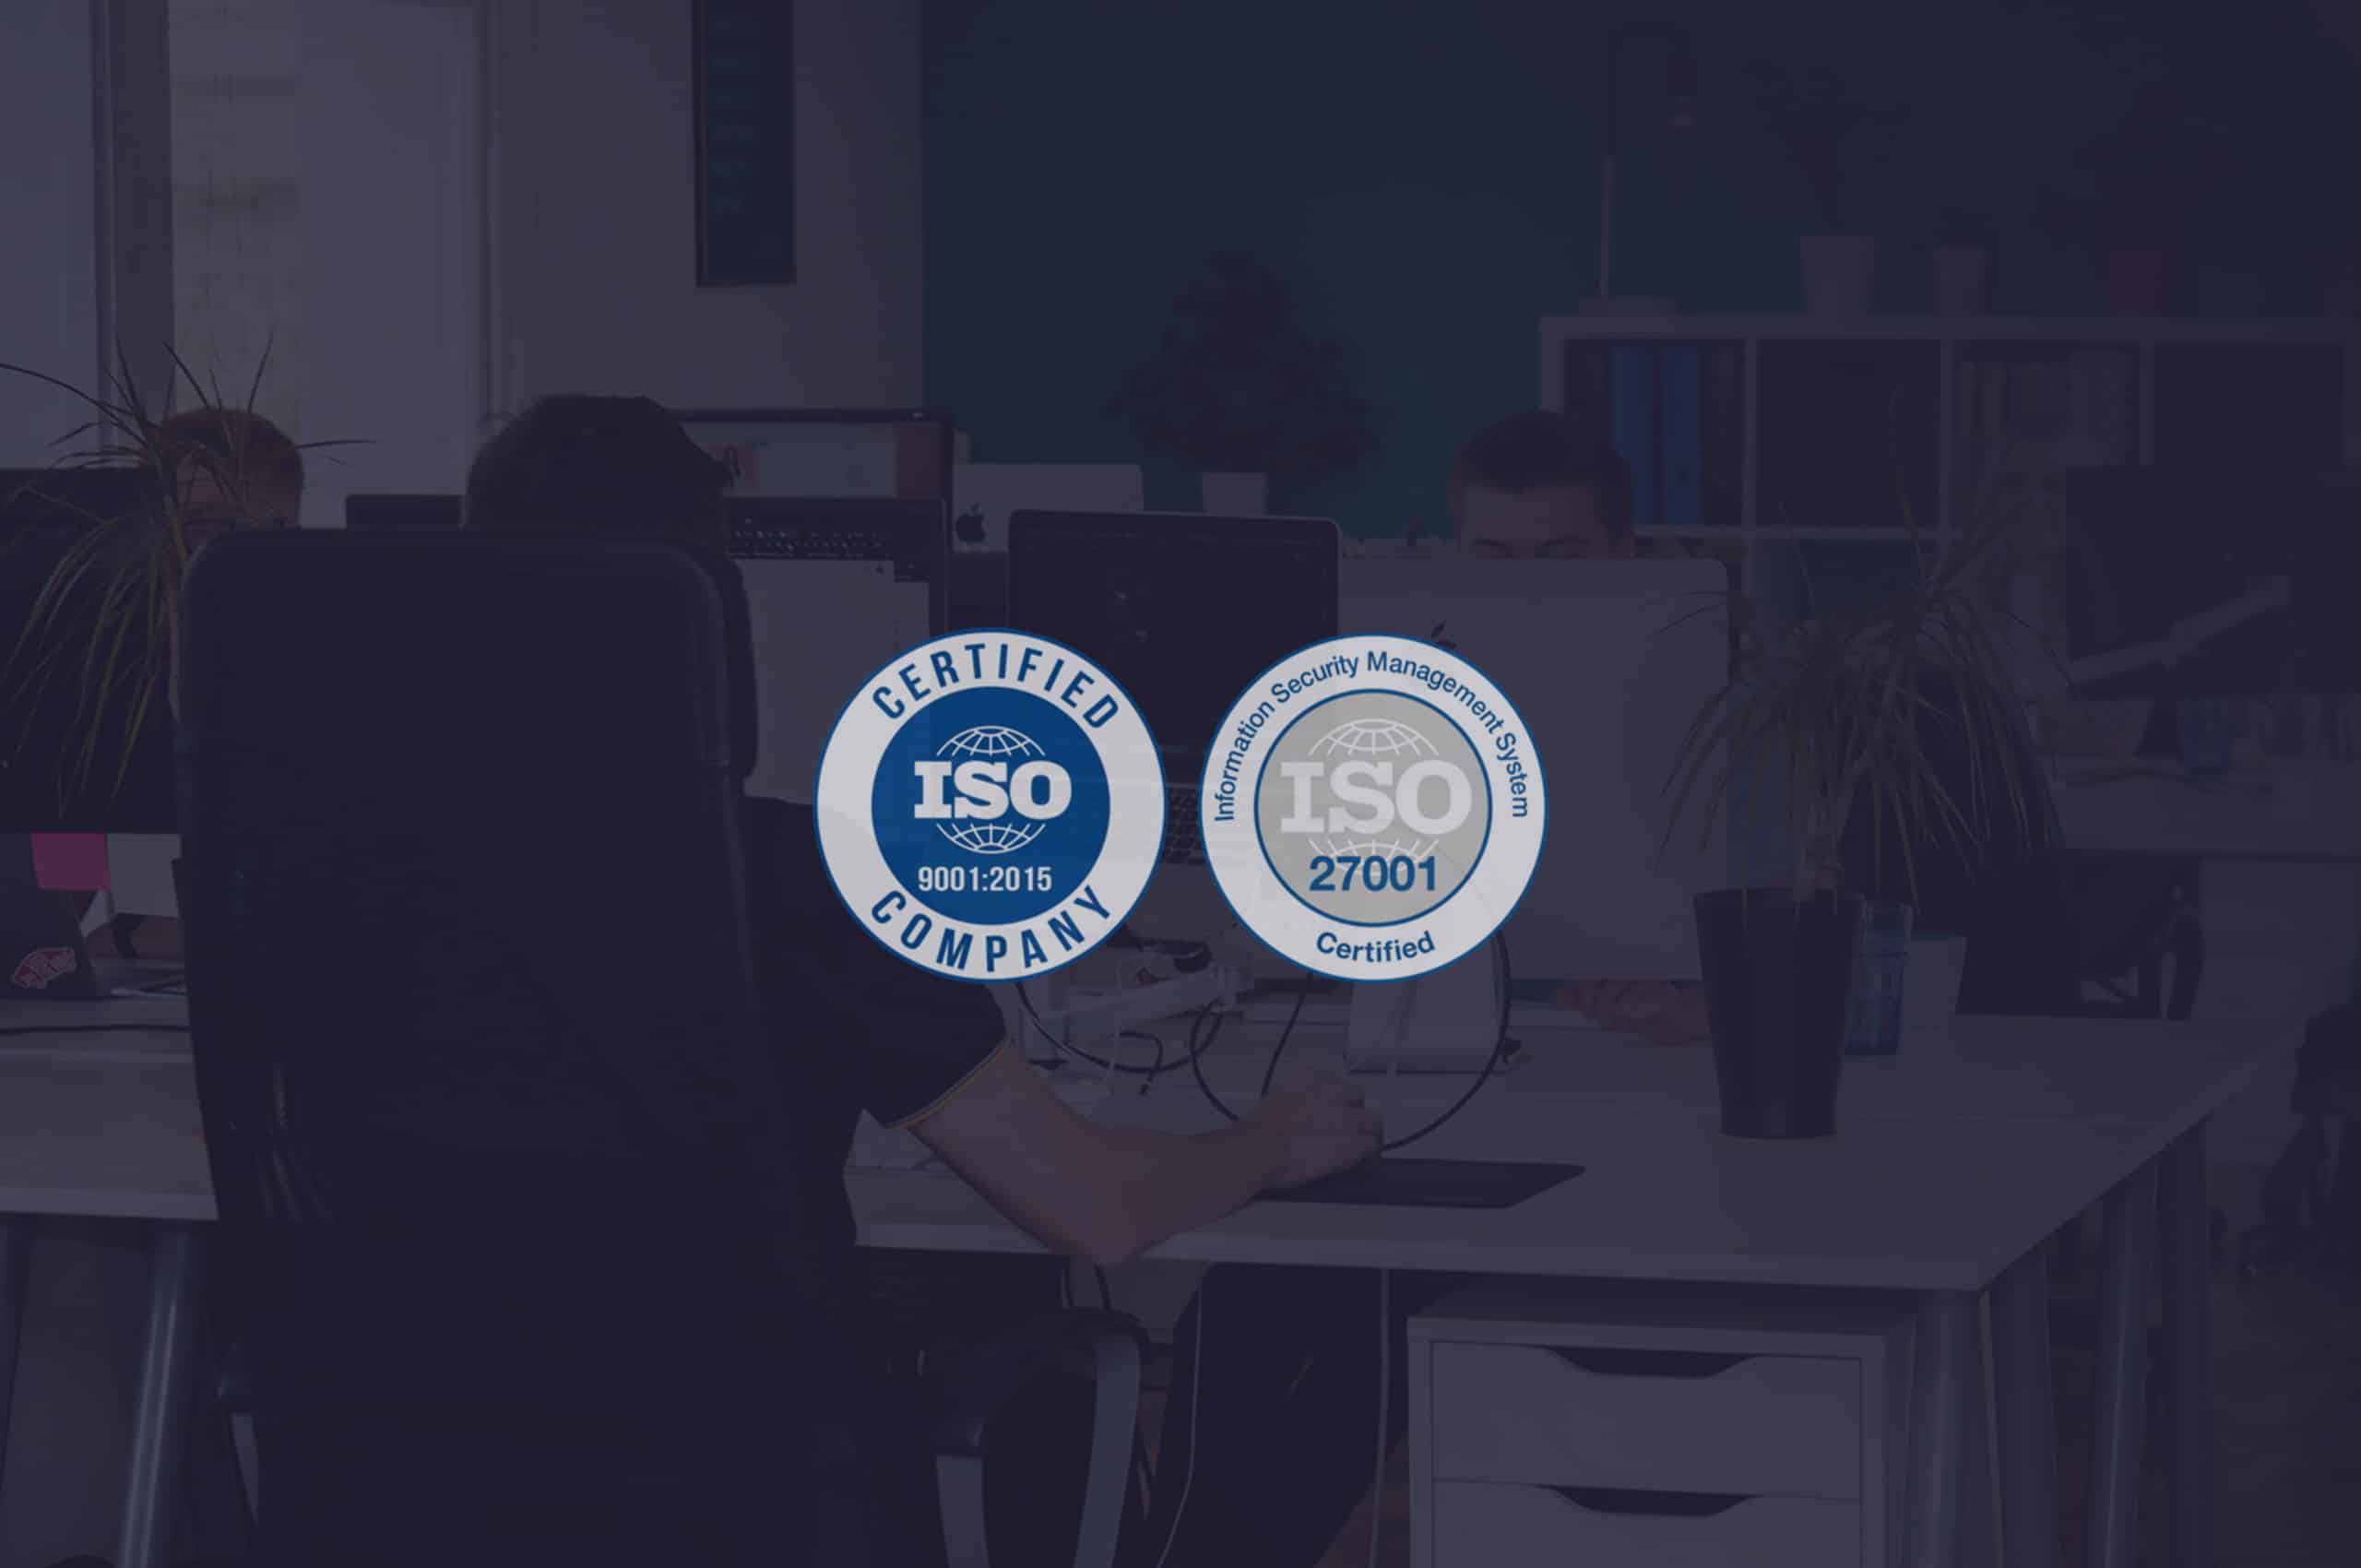 We’ve been recertified for ISO 9001 and 27001!